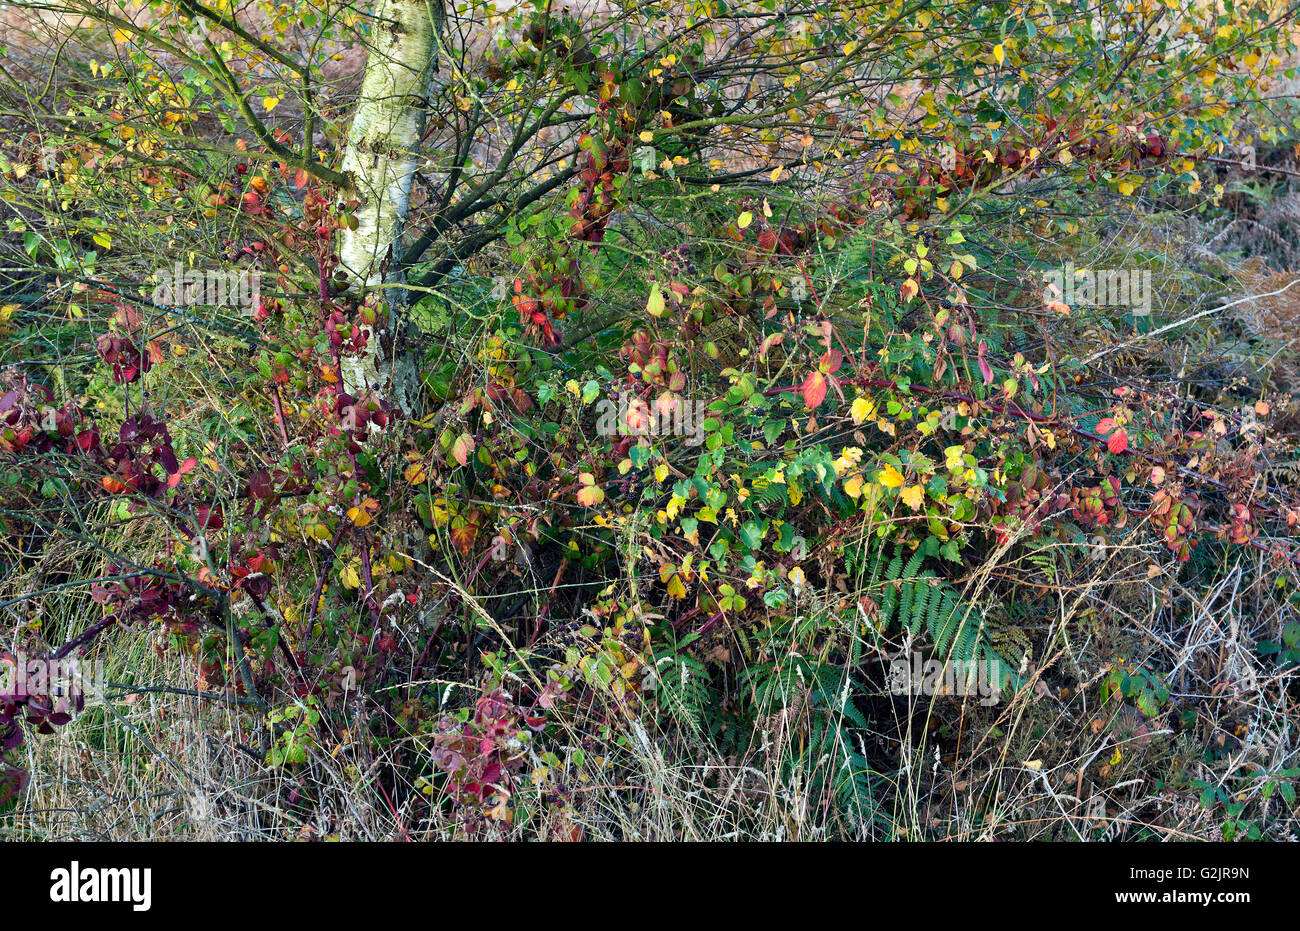 Wild Flora with stunning colour in autumn from Brambles under Silver Birch tree on Cannock Chase Area of Outstanding Natural Bea Stock Photo